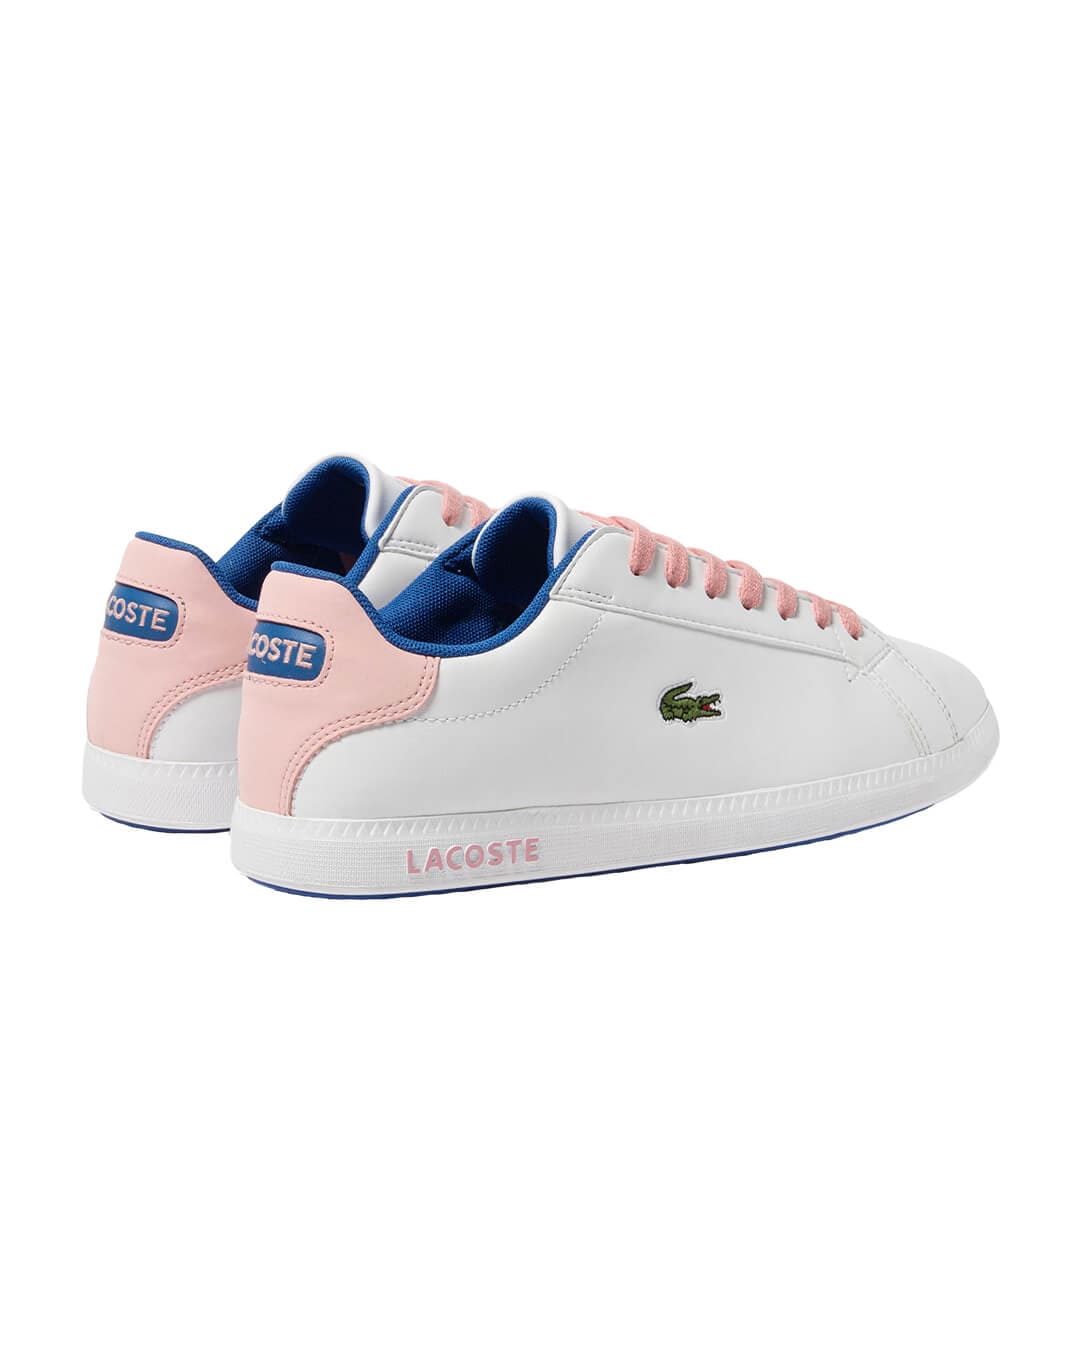 Lacoste Shoes Lacoste Graduate Synthetic White Sneakers